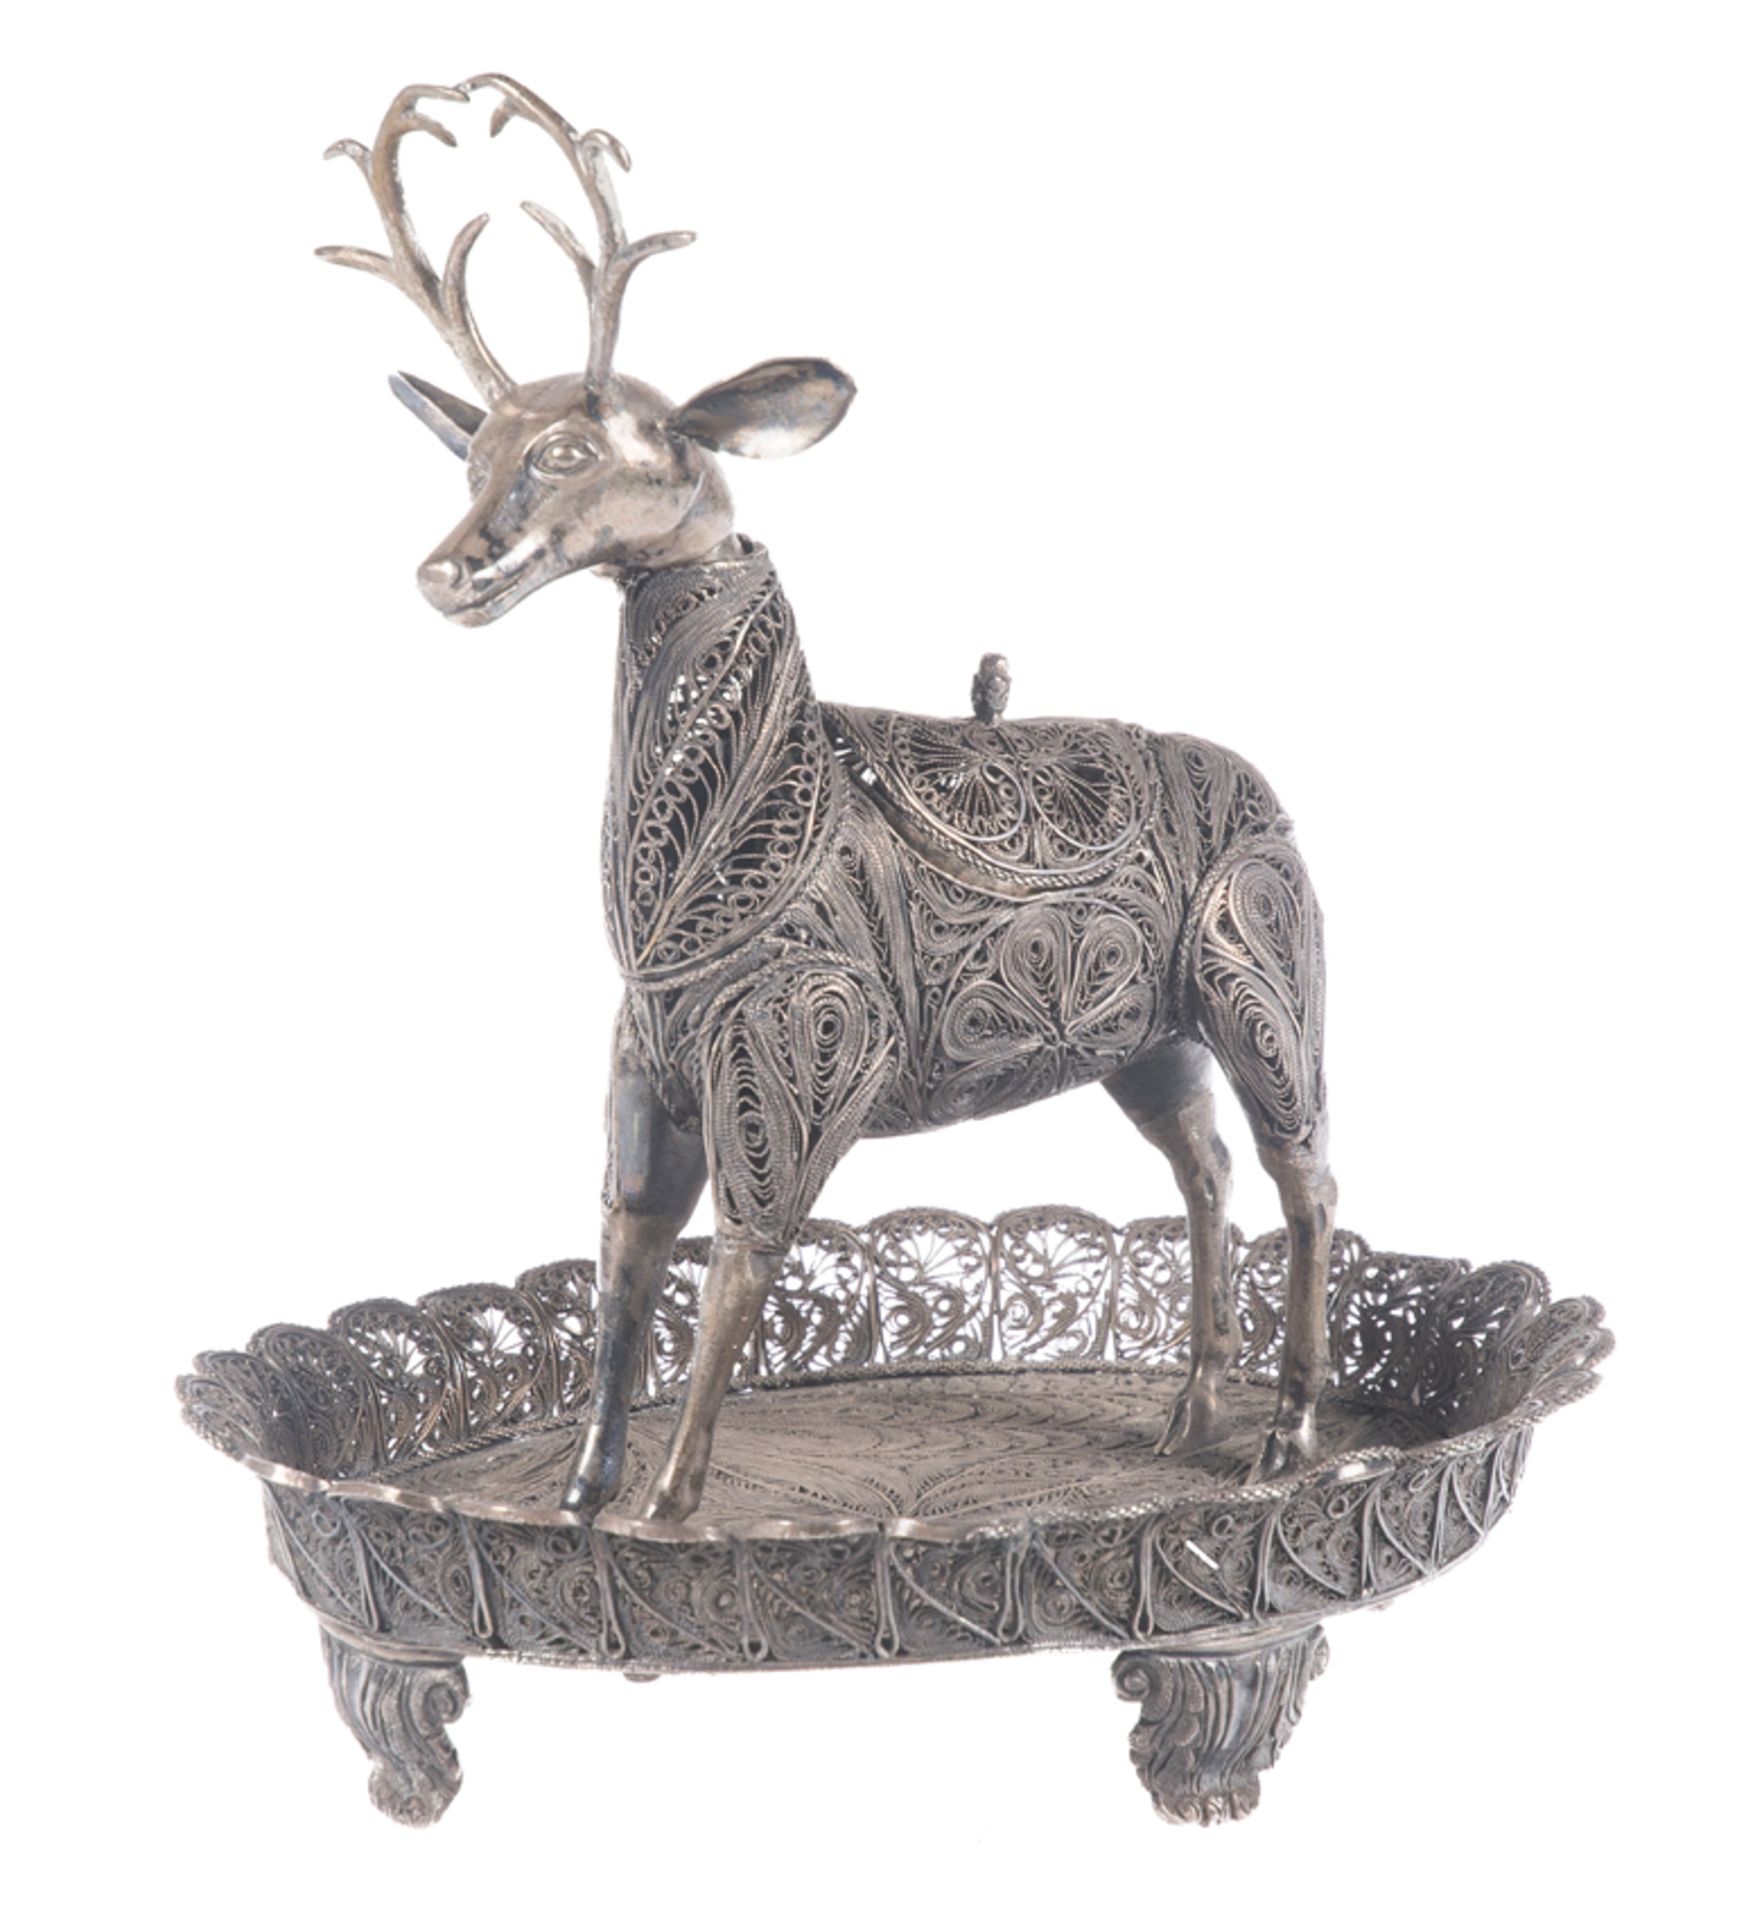 "Sahumador". Deer-shaped, silver filigree incense burner in chased and embossed cast silver. Colonia